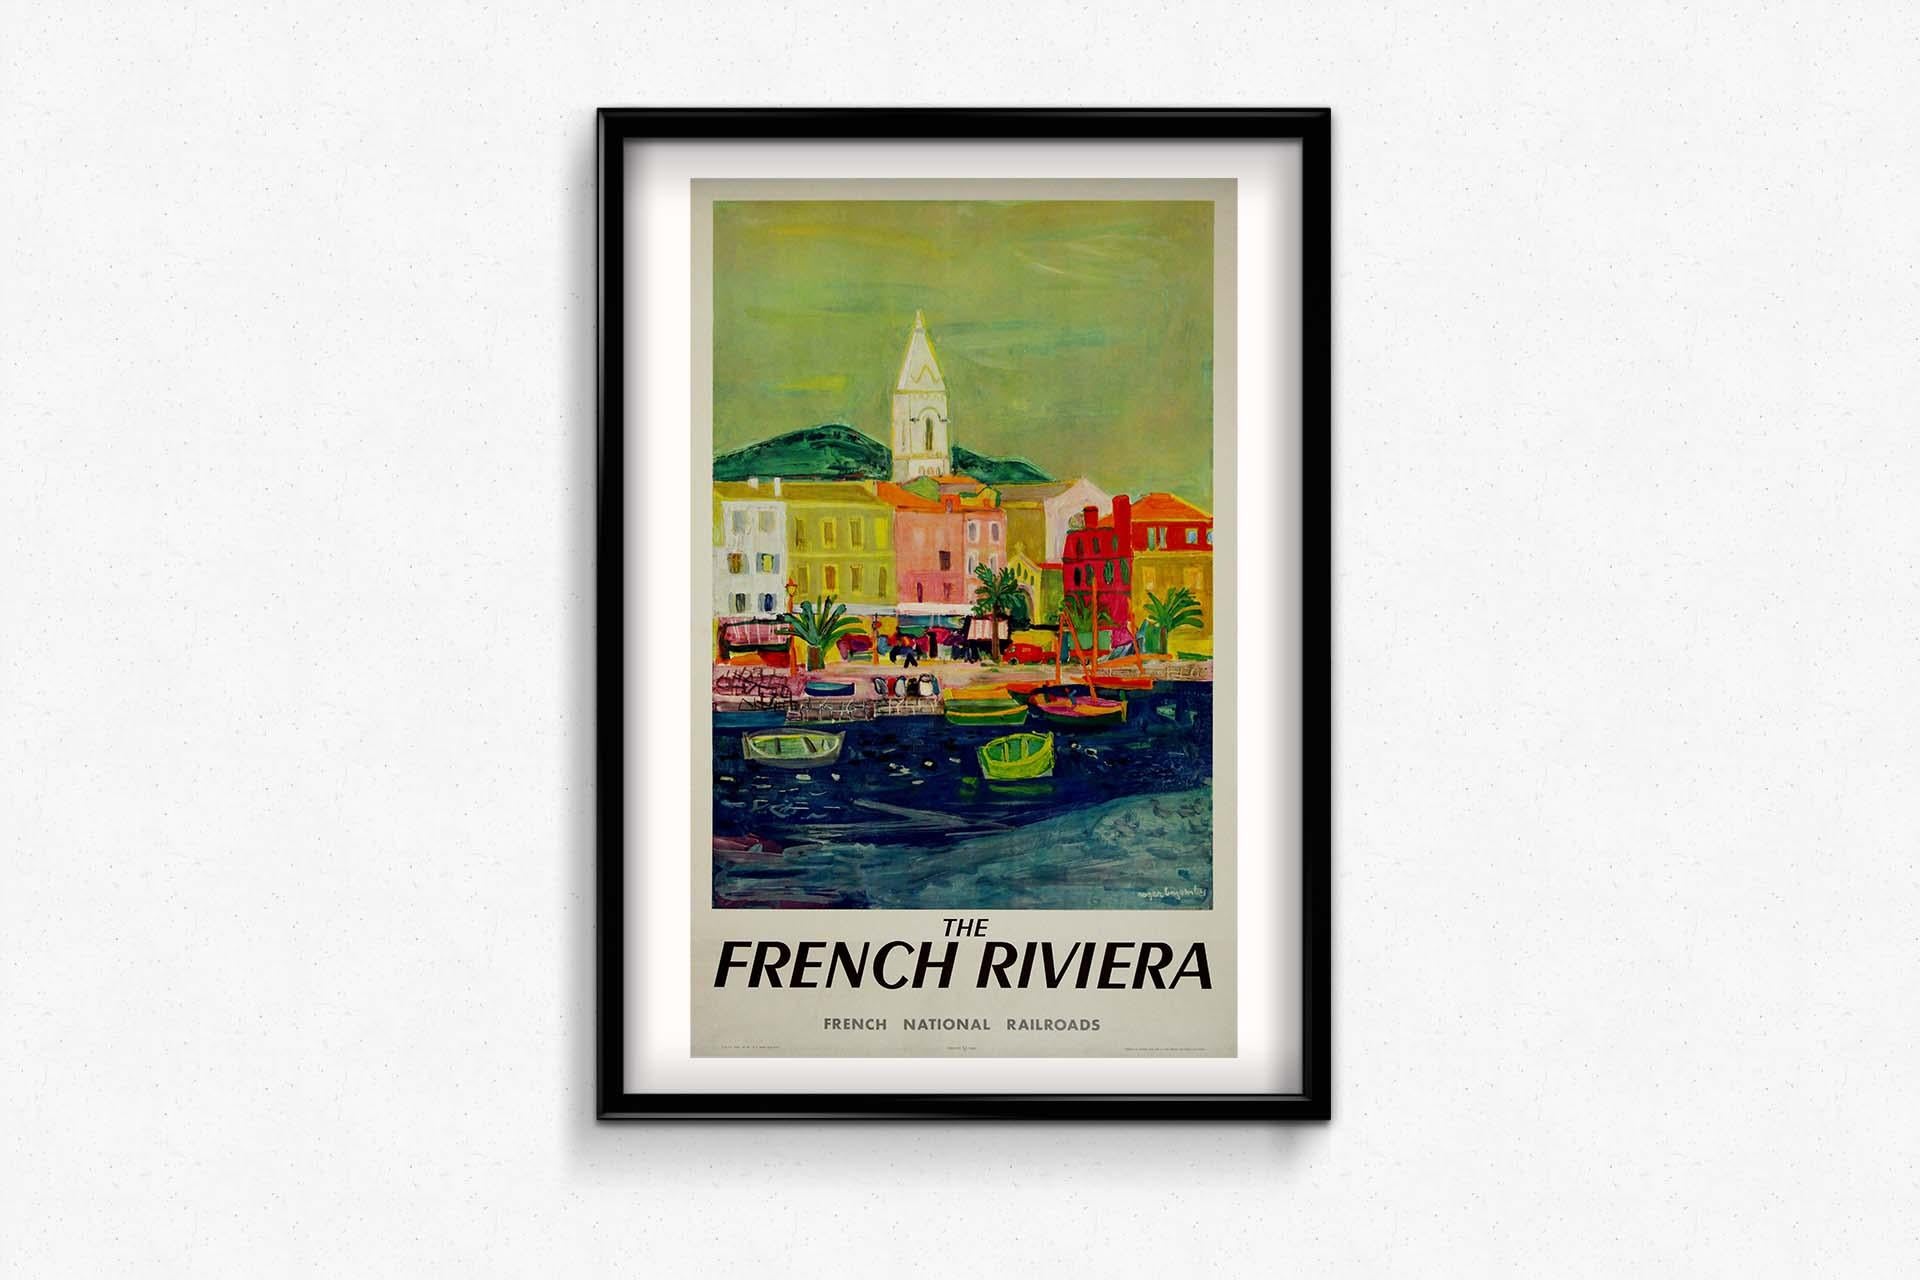 Step into the sun-drenched world of the French Riviera through the lens of Roger Bezombes' enchanting 1956 poster, a radiant masterpiece created for the French National Railroads (SNCF). This vintage gem invites us to embark on a visual journey that